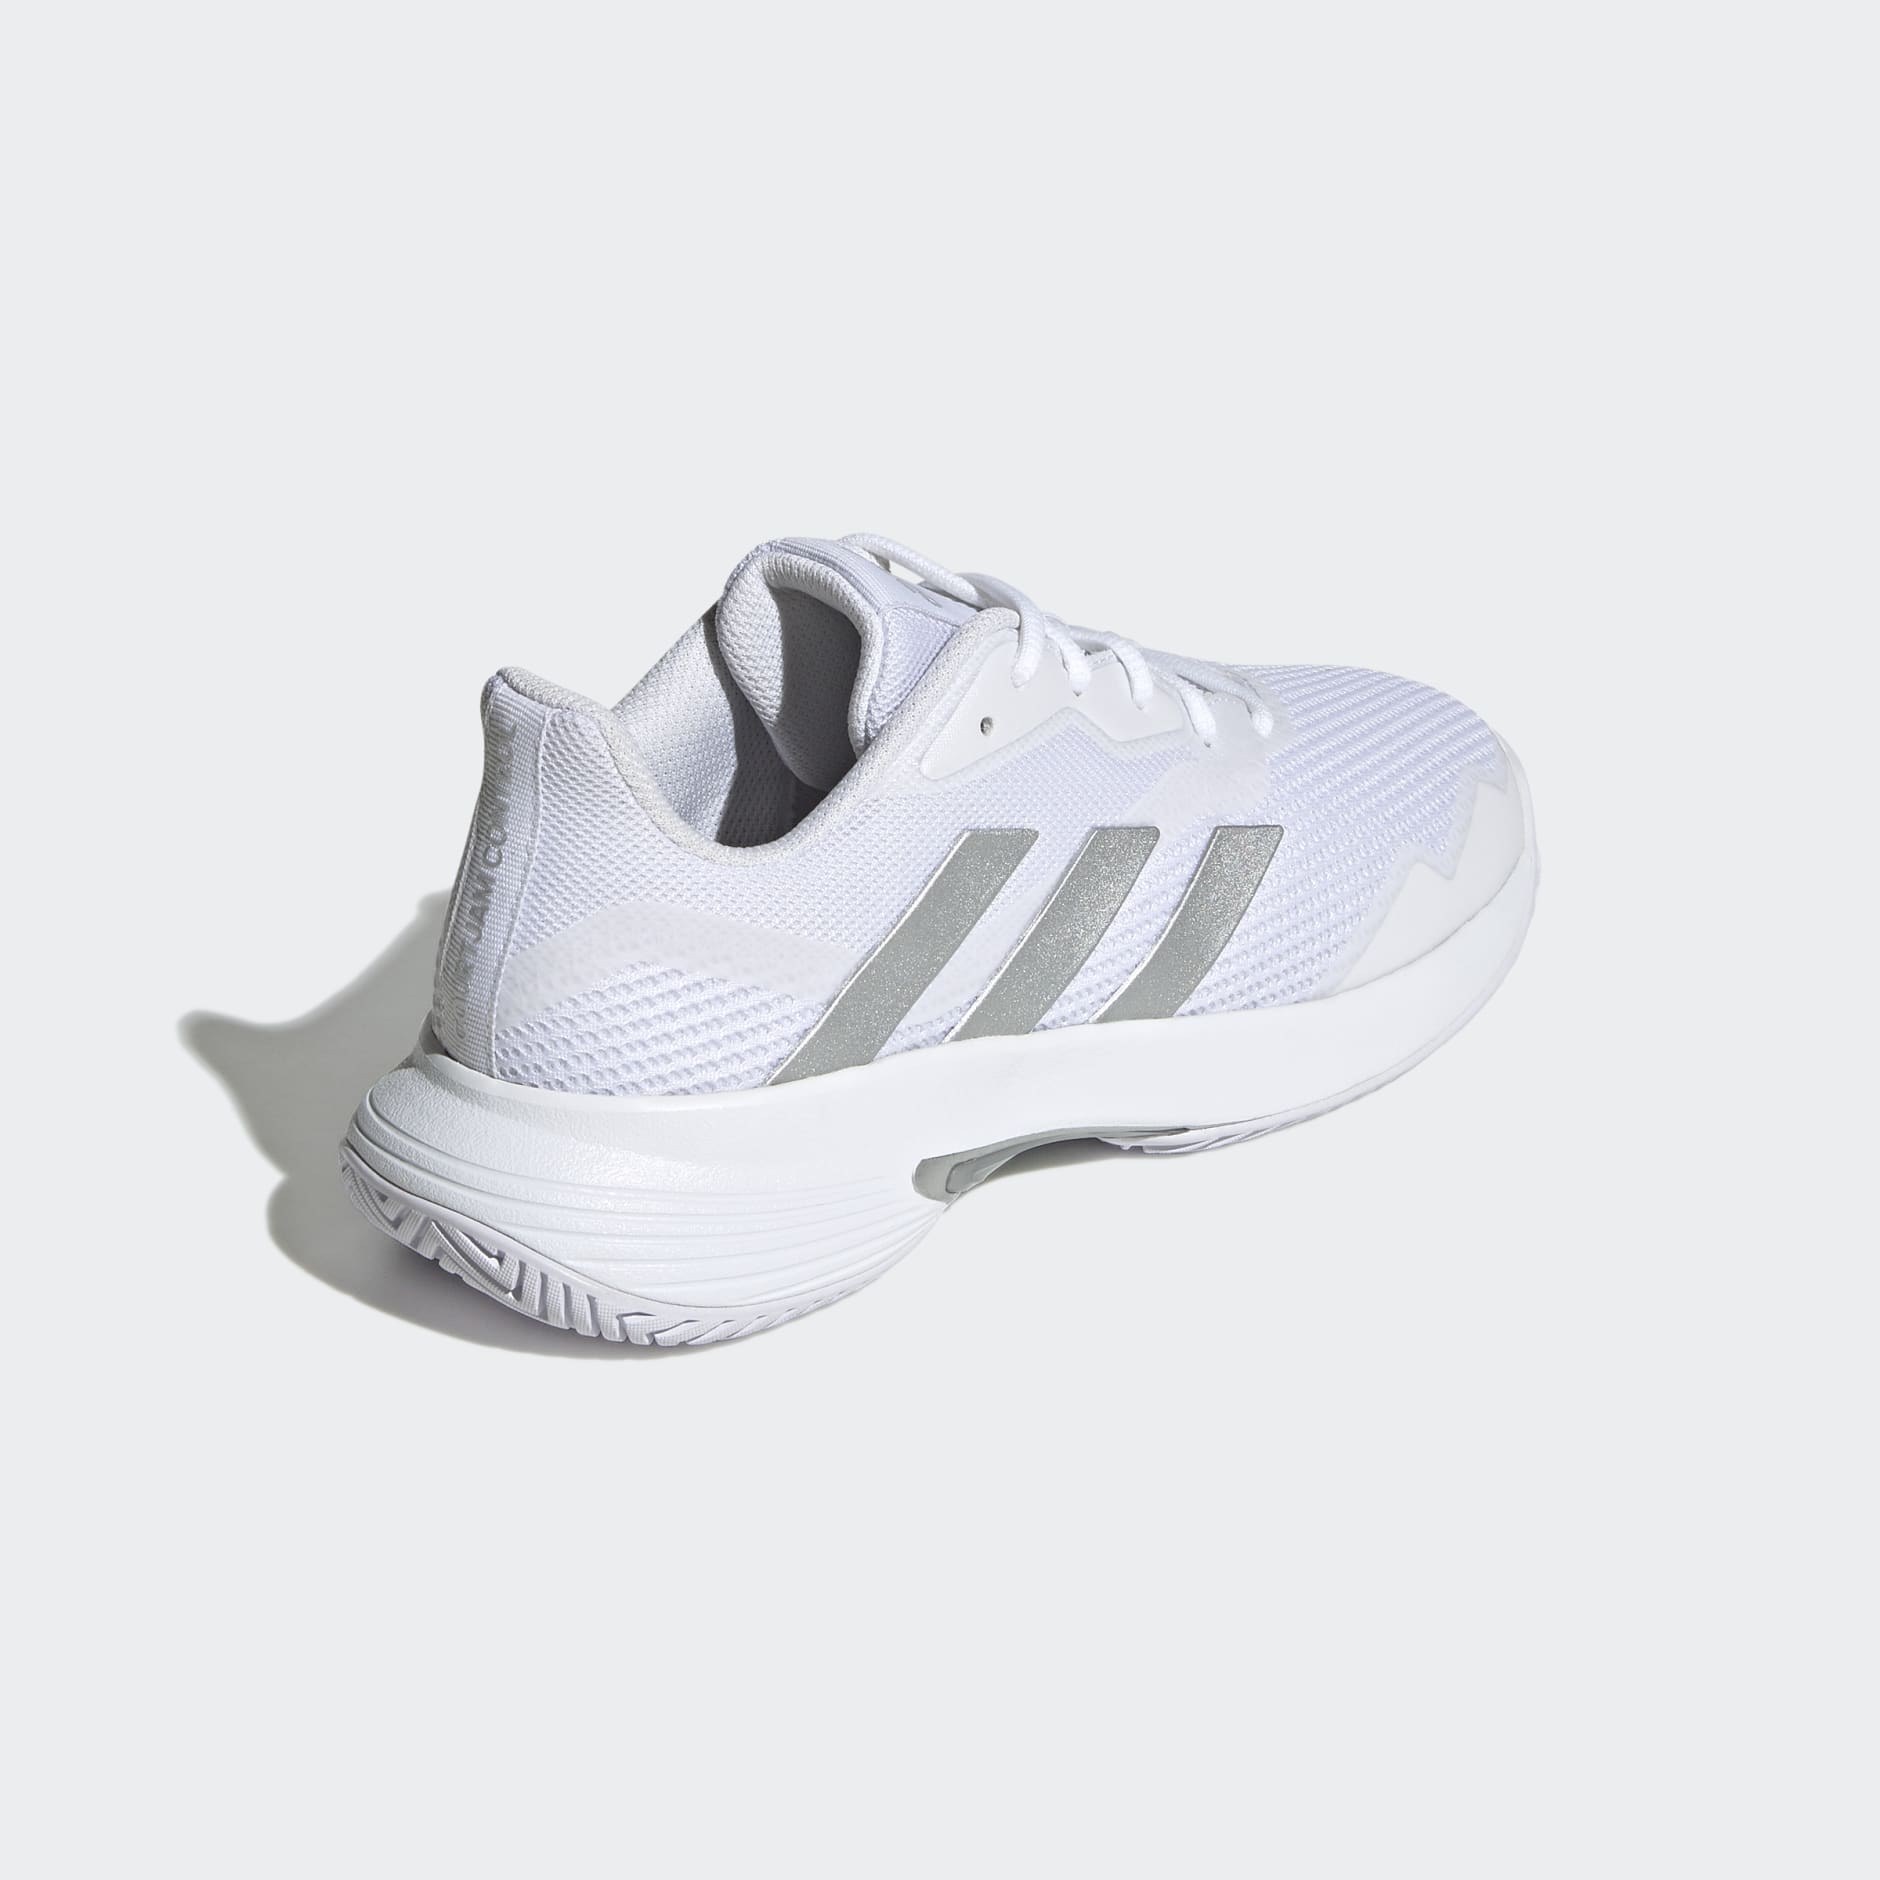 Shoes - Courtjam Control Tennis Shoes - White | adidas South Africa